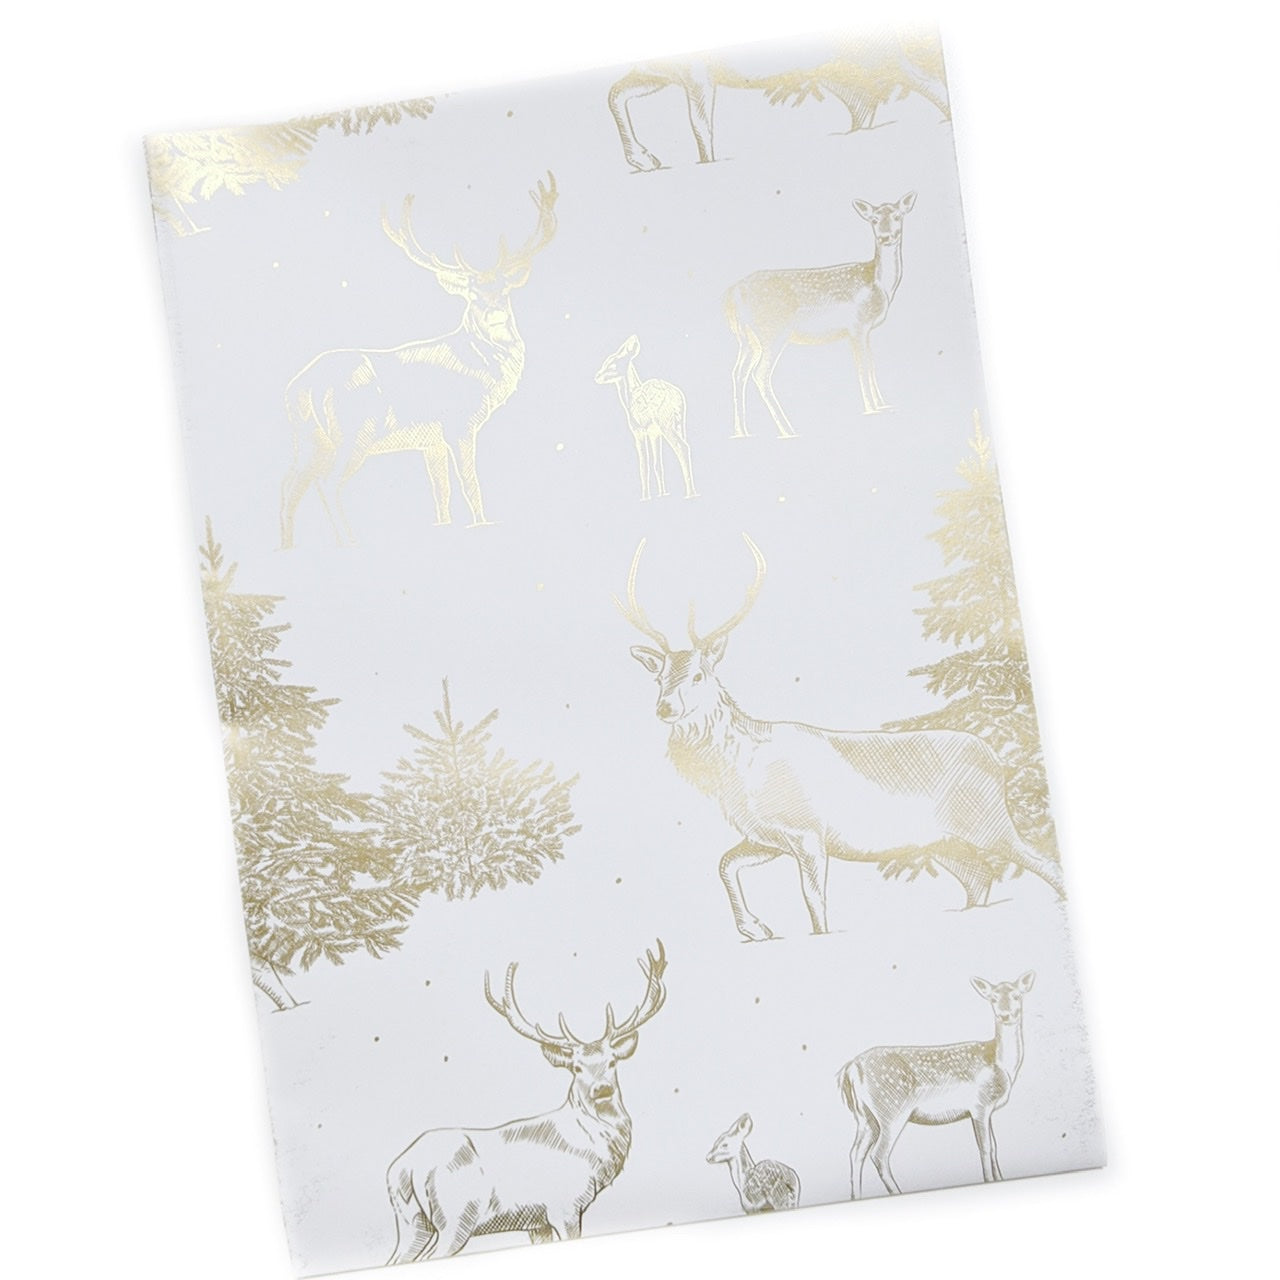 recyclable metallic stag and deer Christmas gift wrap by Ceinwen Campbell